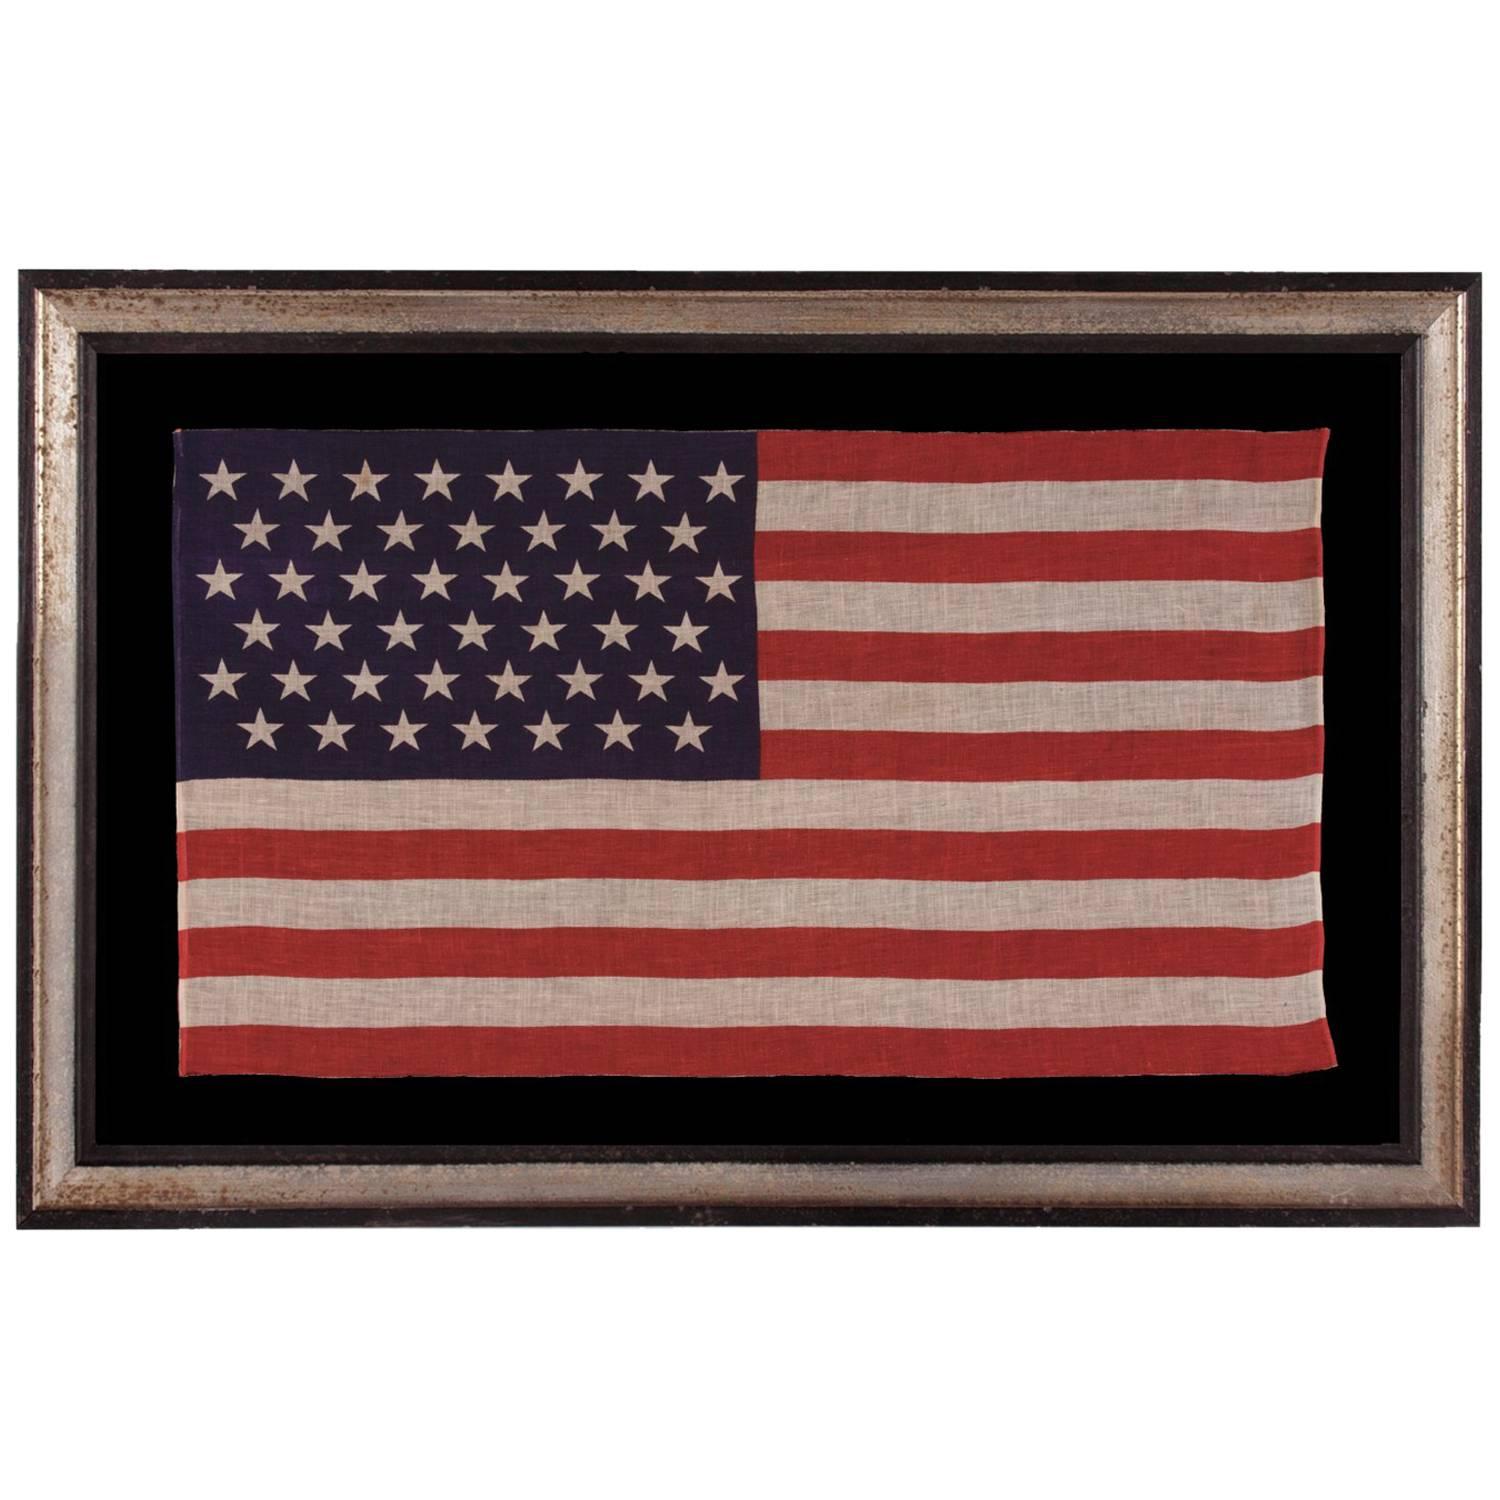 45 Stars in Staggered Rows on an Antique American Parade Flag